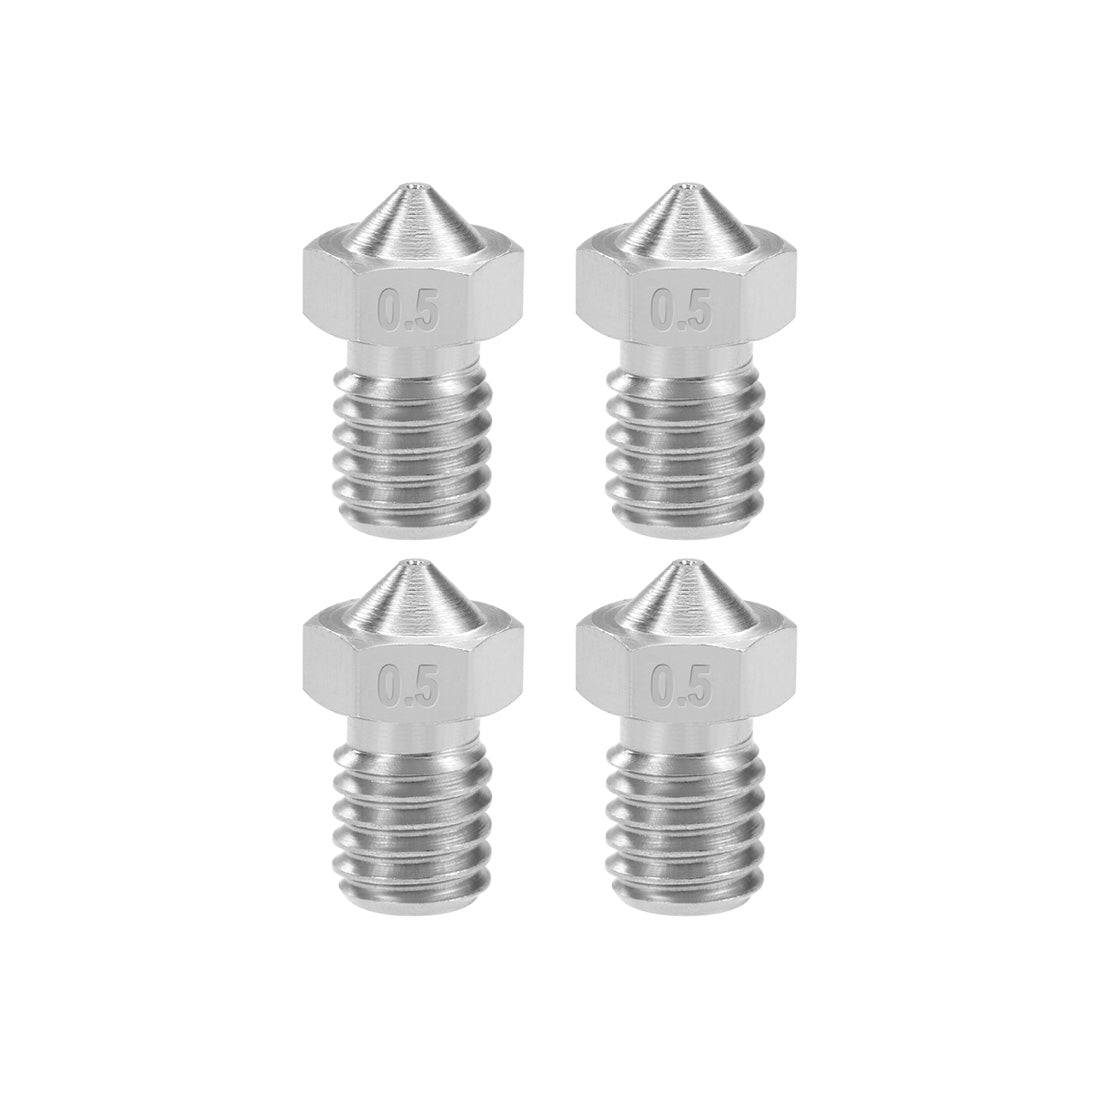 Uxcell Uxcell 0.6mm 3D Printer Nozzle Head M6 Thread Replacement for V5 V6 1.75mm Extruder Print, Stainless Steel 4pcs